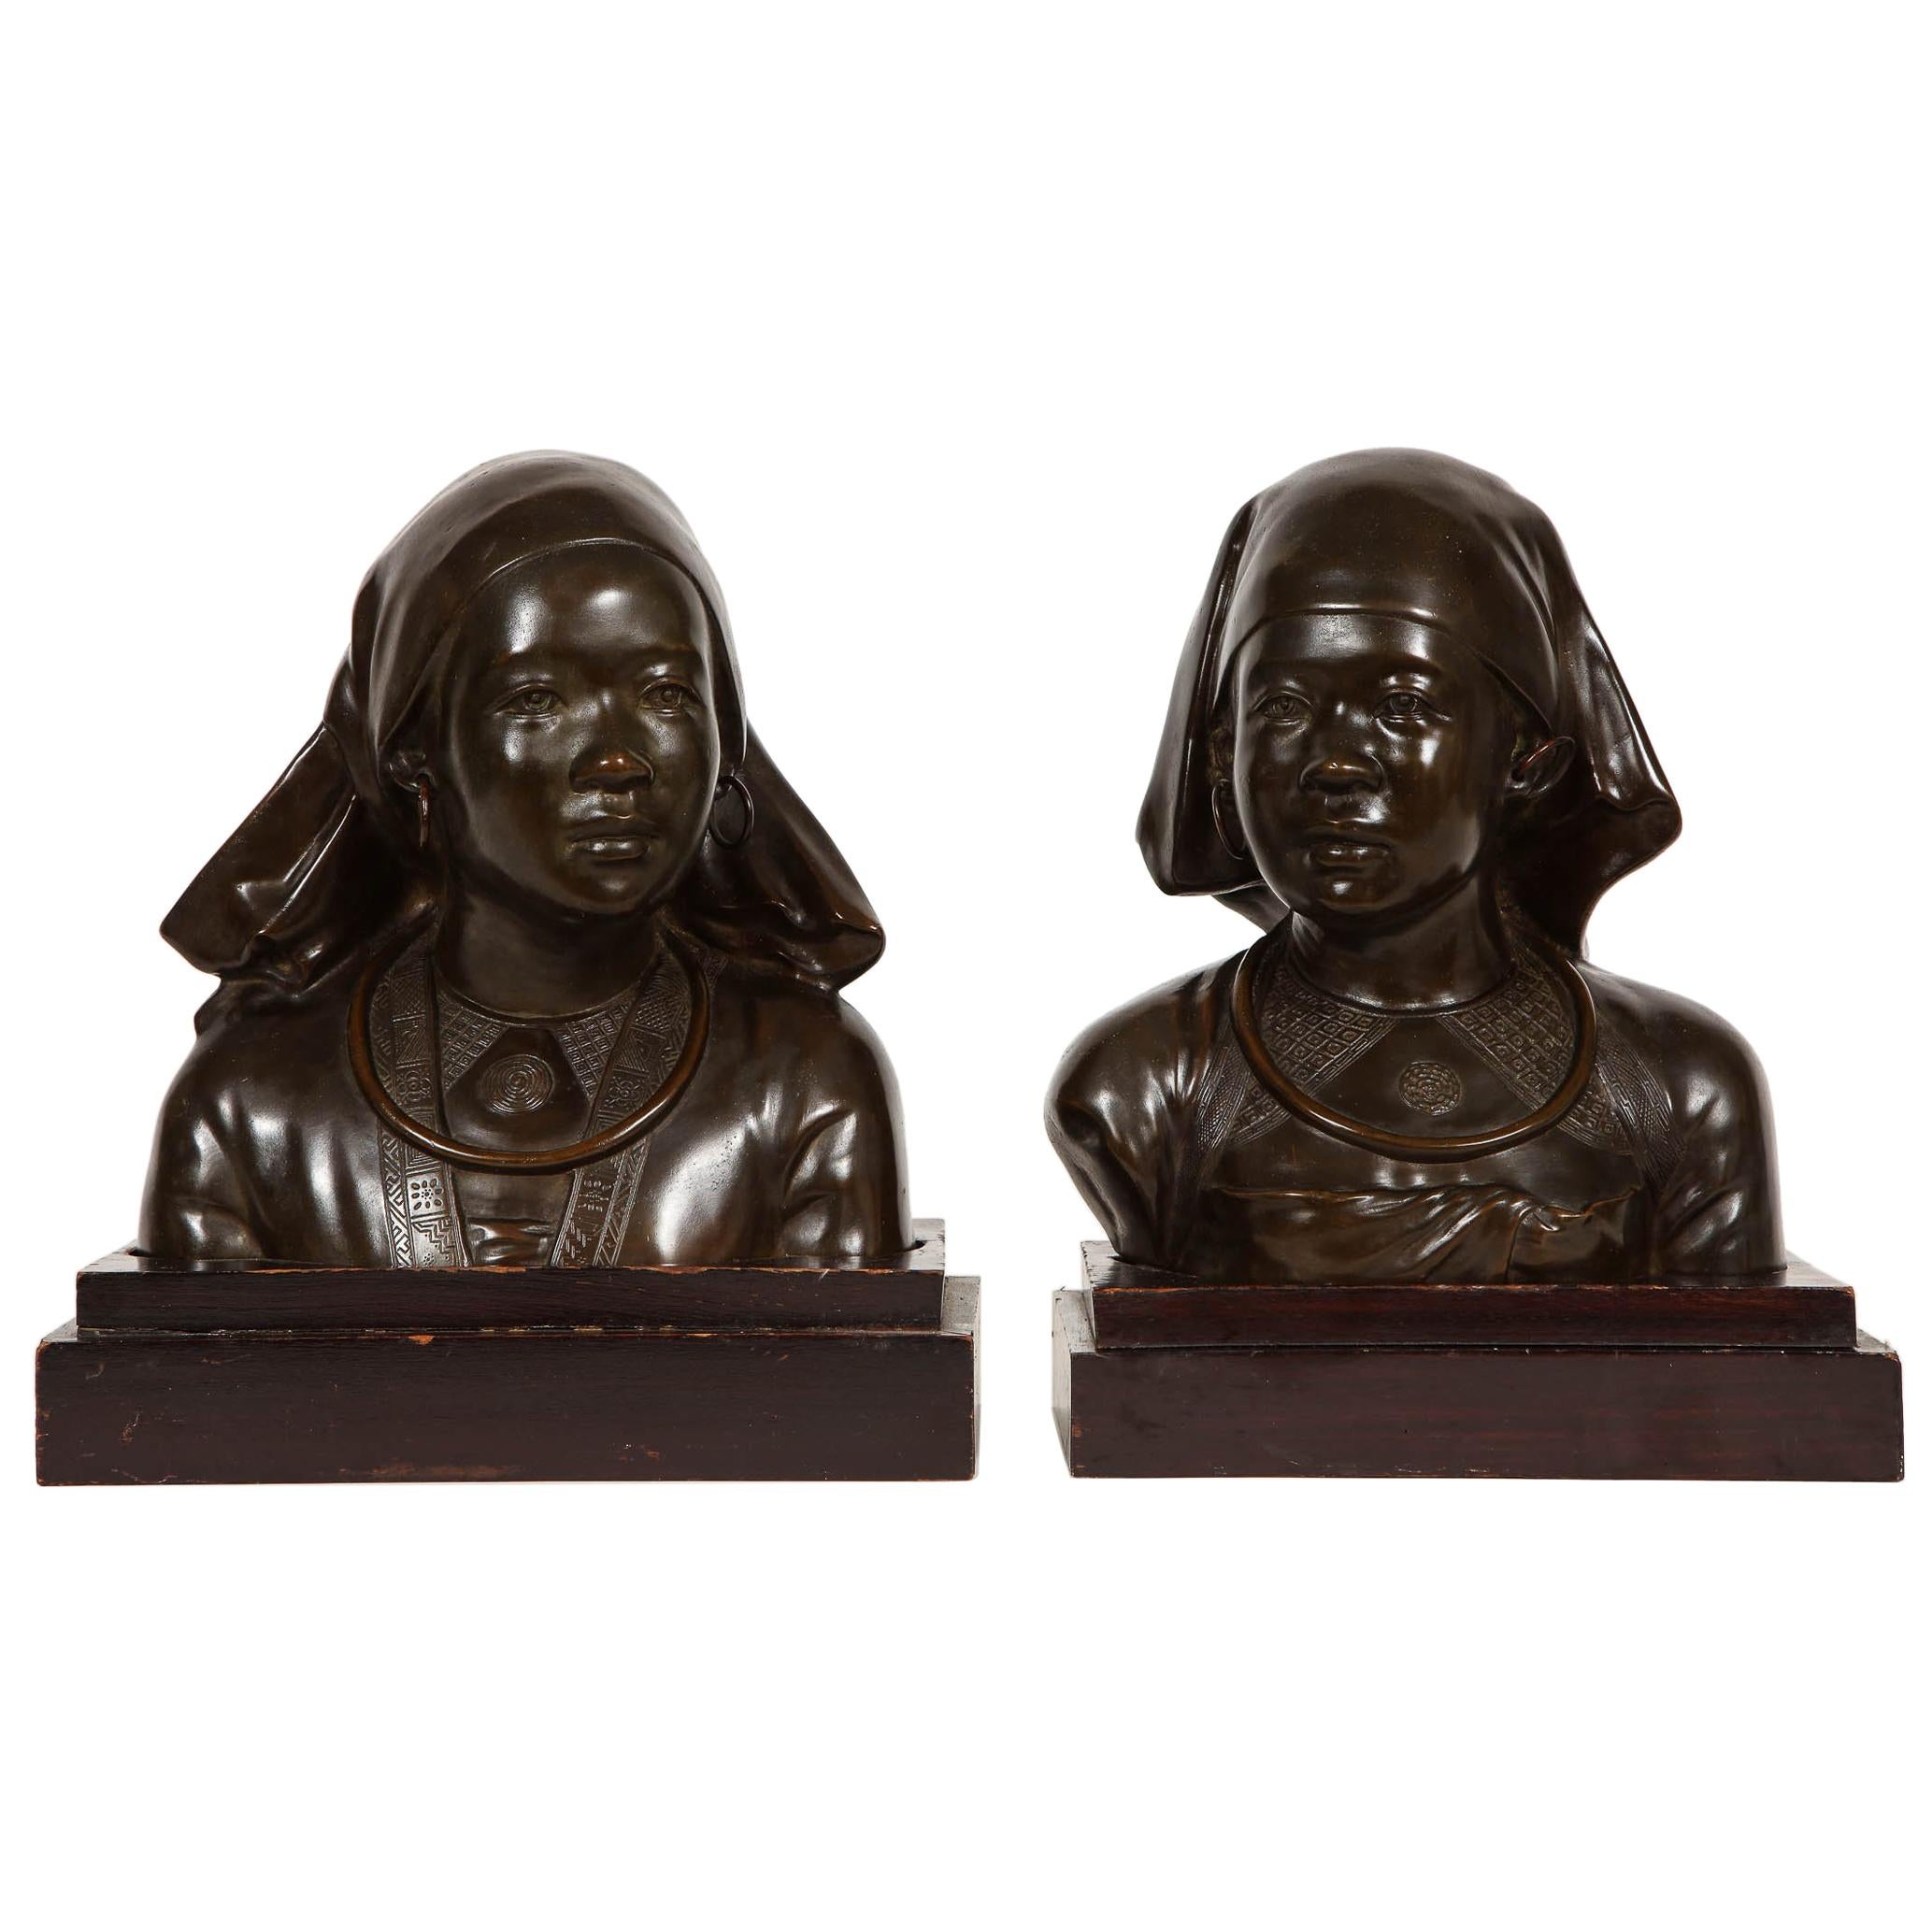 Unusual Pair of French Japonism Bronze Busts of Girls